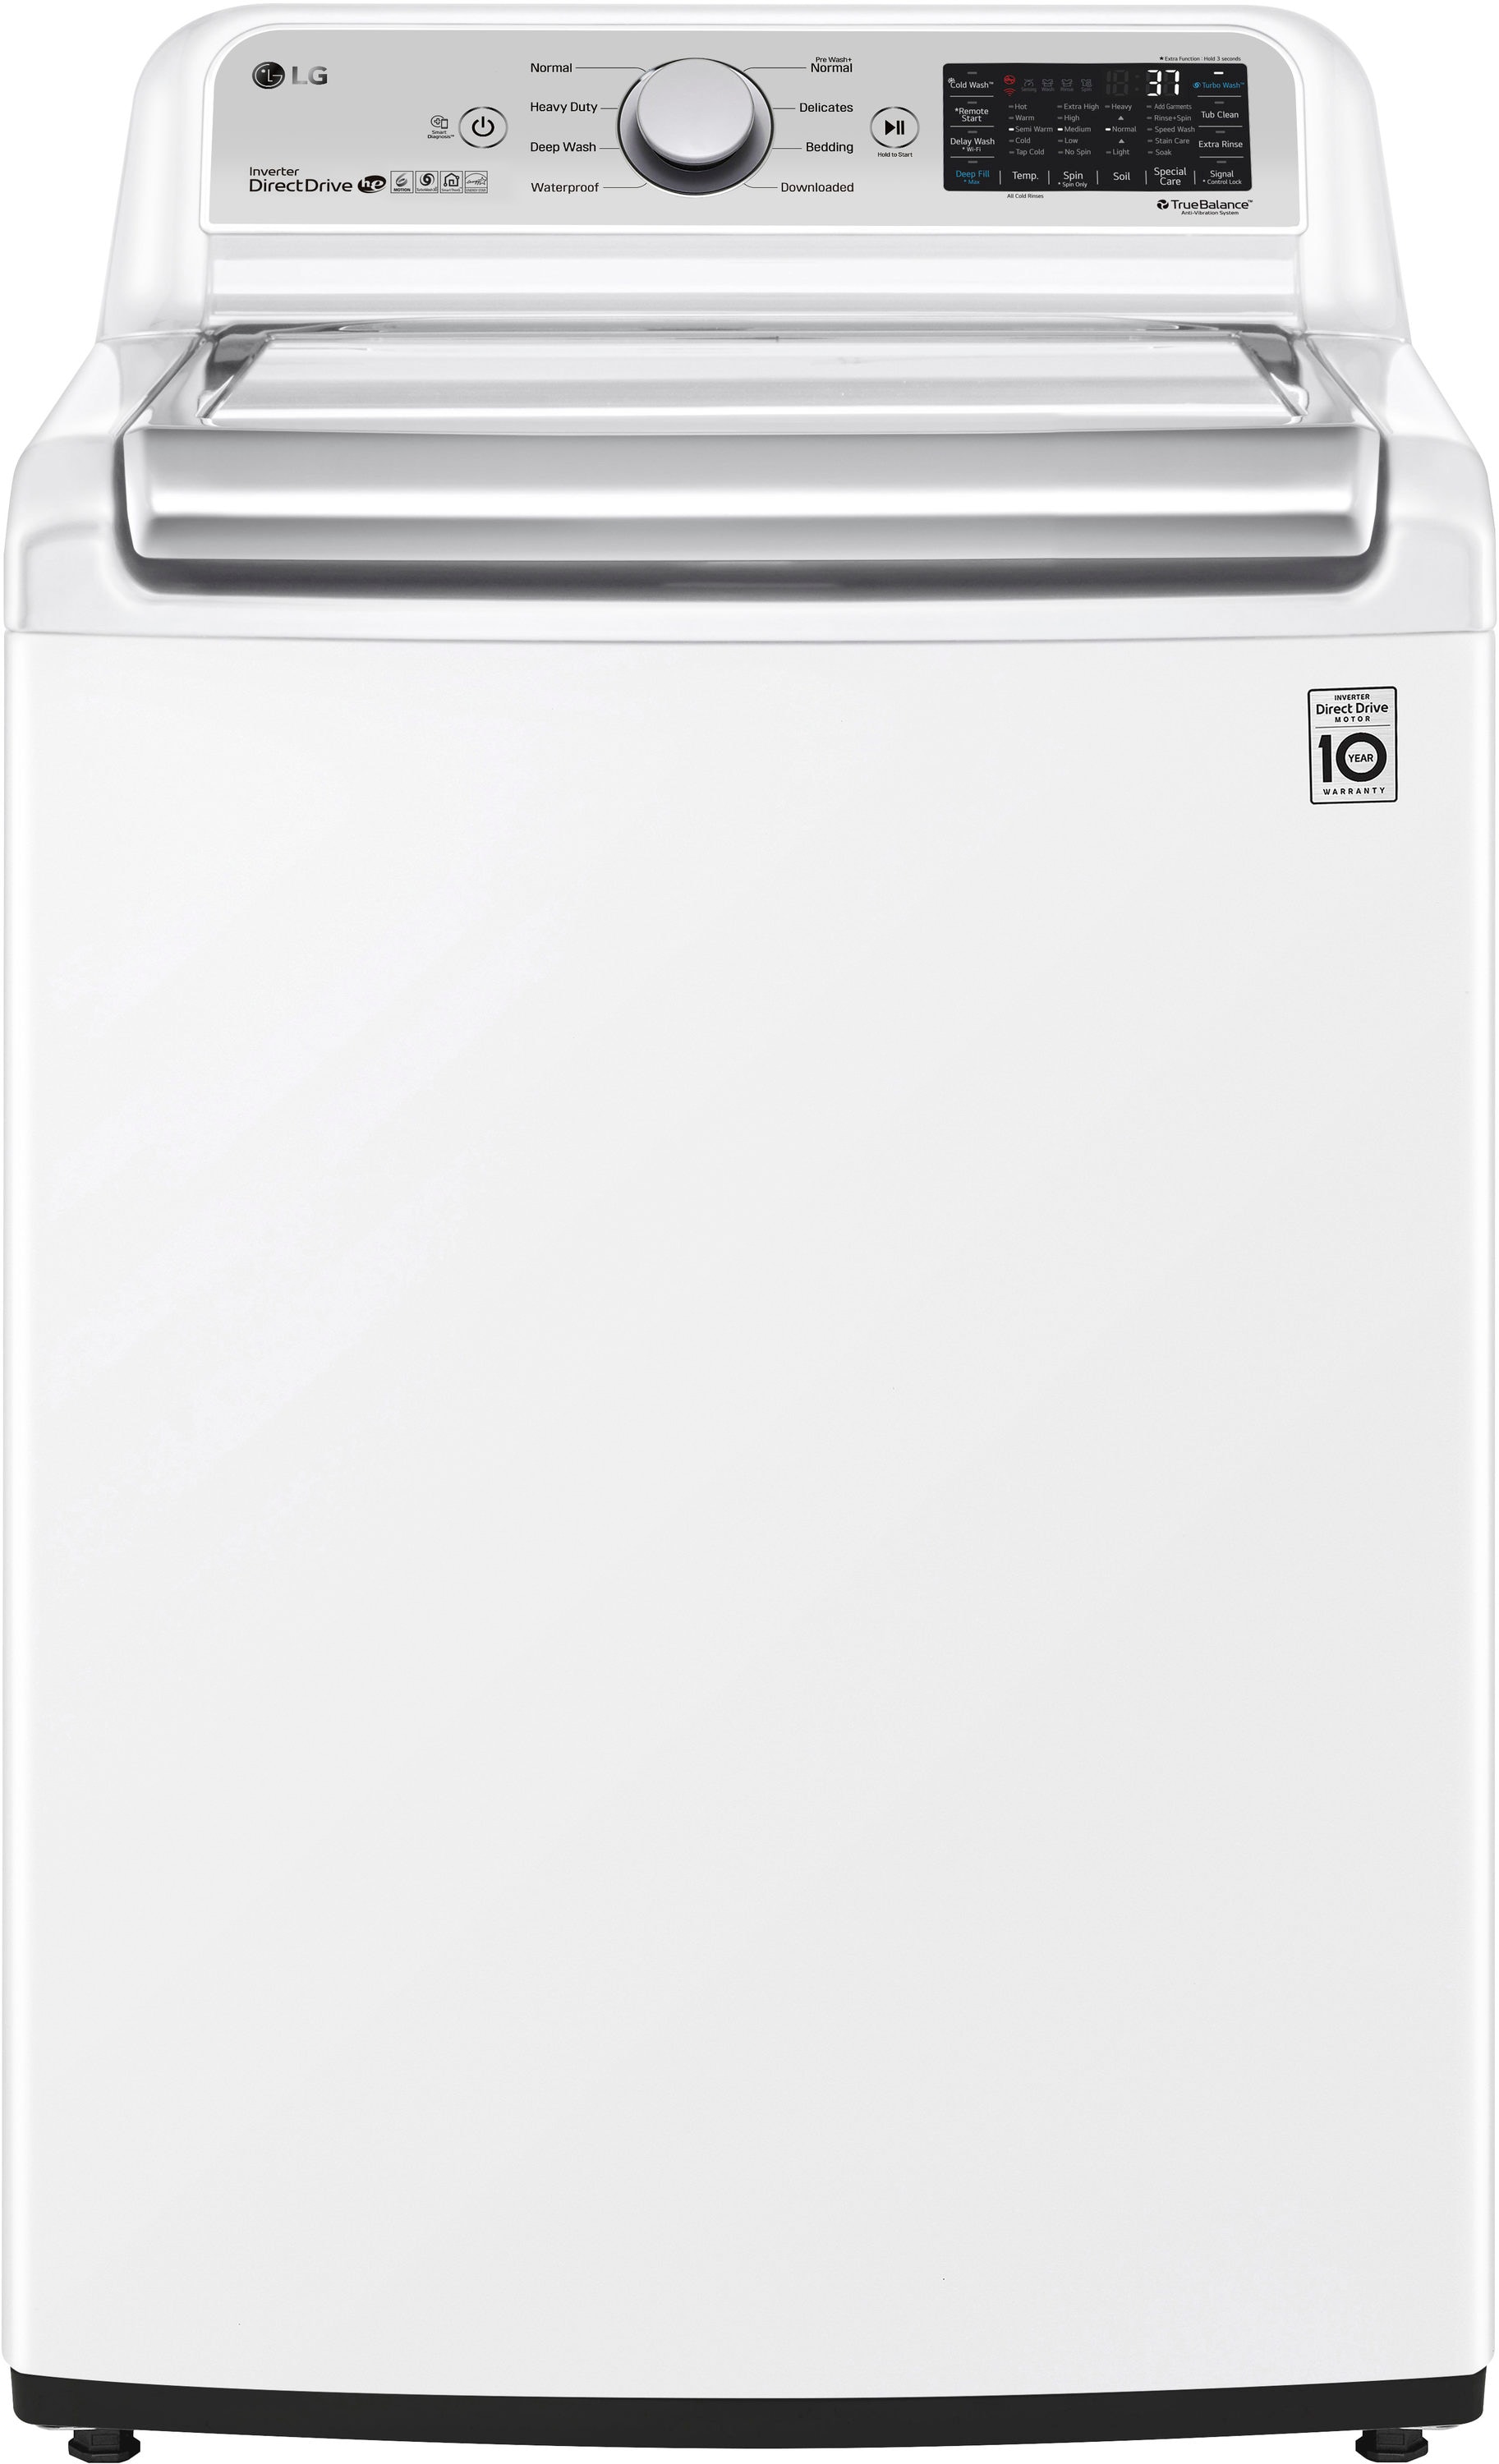 LG WT7300CV: 5.0 cu.ft. Top Load Washer with TurboWash3D™